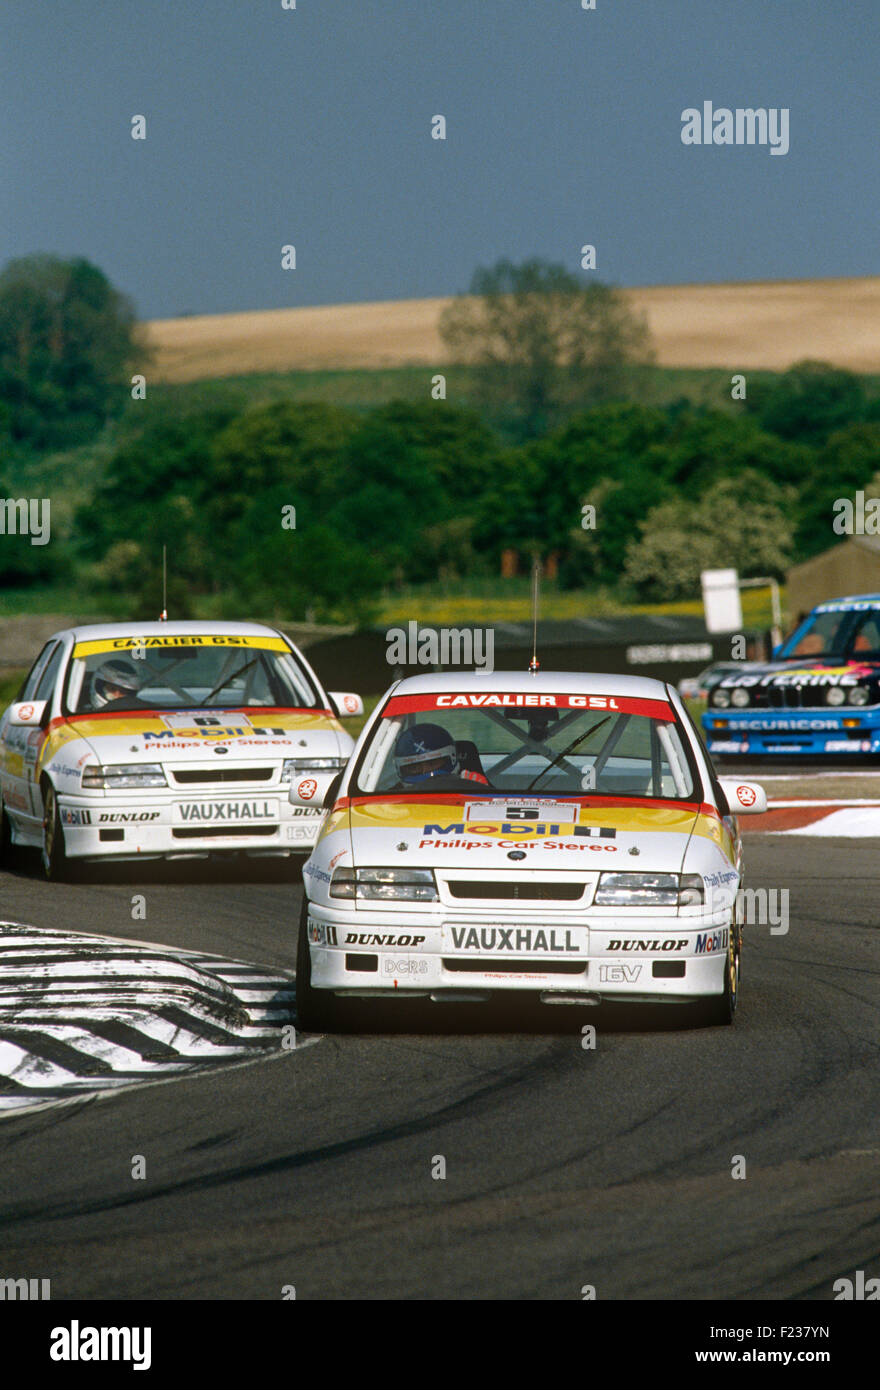 Vauxhall Cavaliers racing in the 1990s British Touring Car Championship Stock Photo